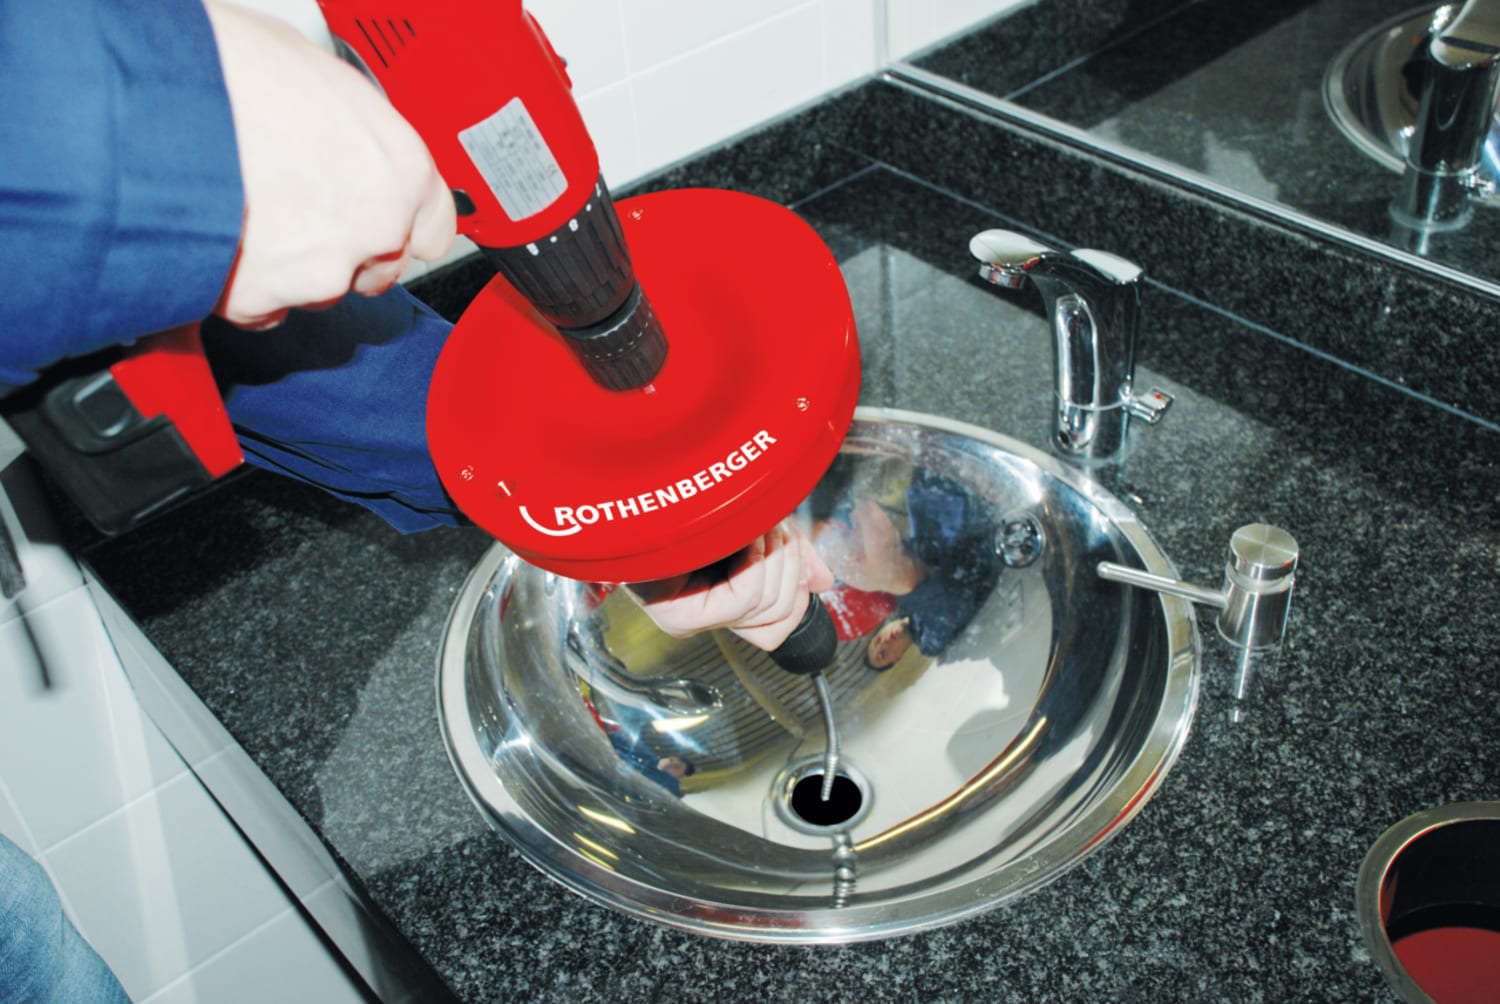 Rothenberger Rospi H&E Plus Drain Cleaner with Spiral being used in a sink on a different angle.